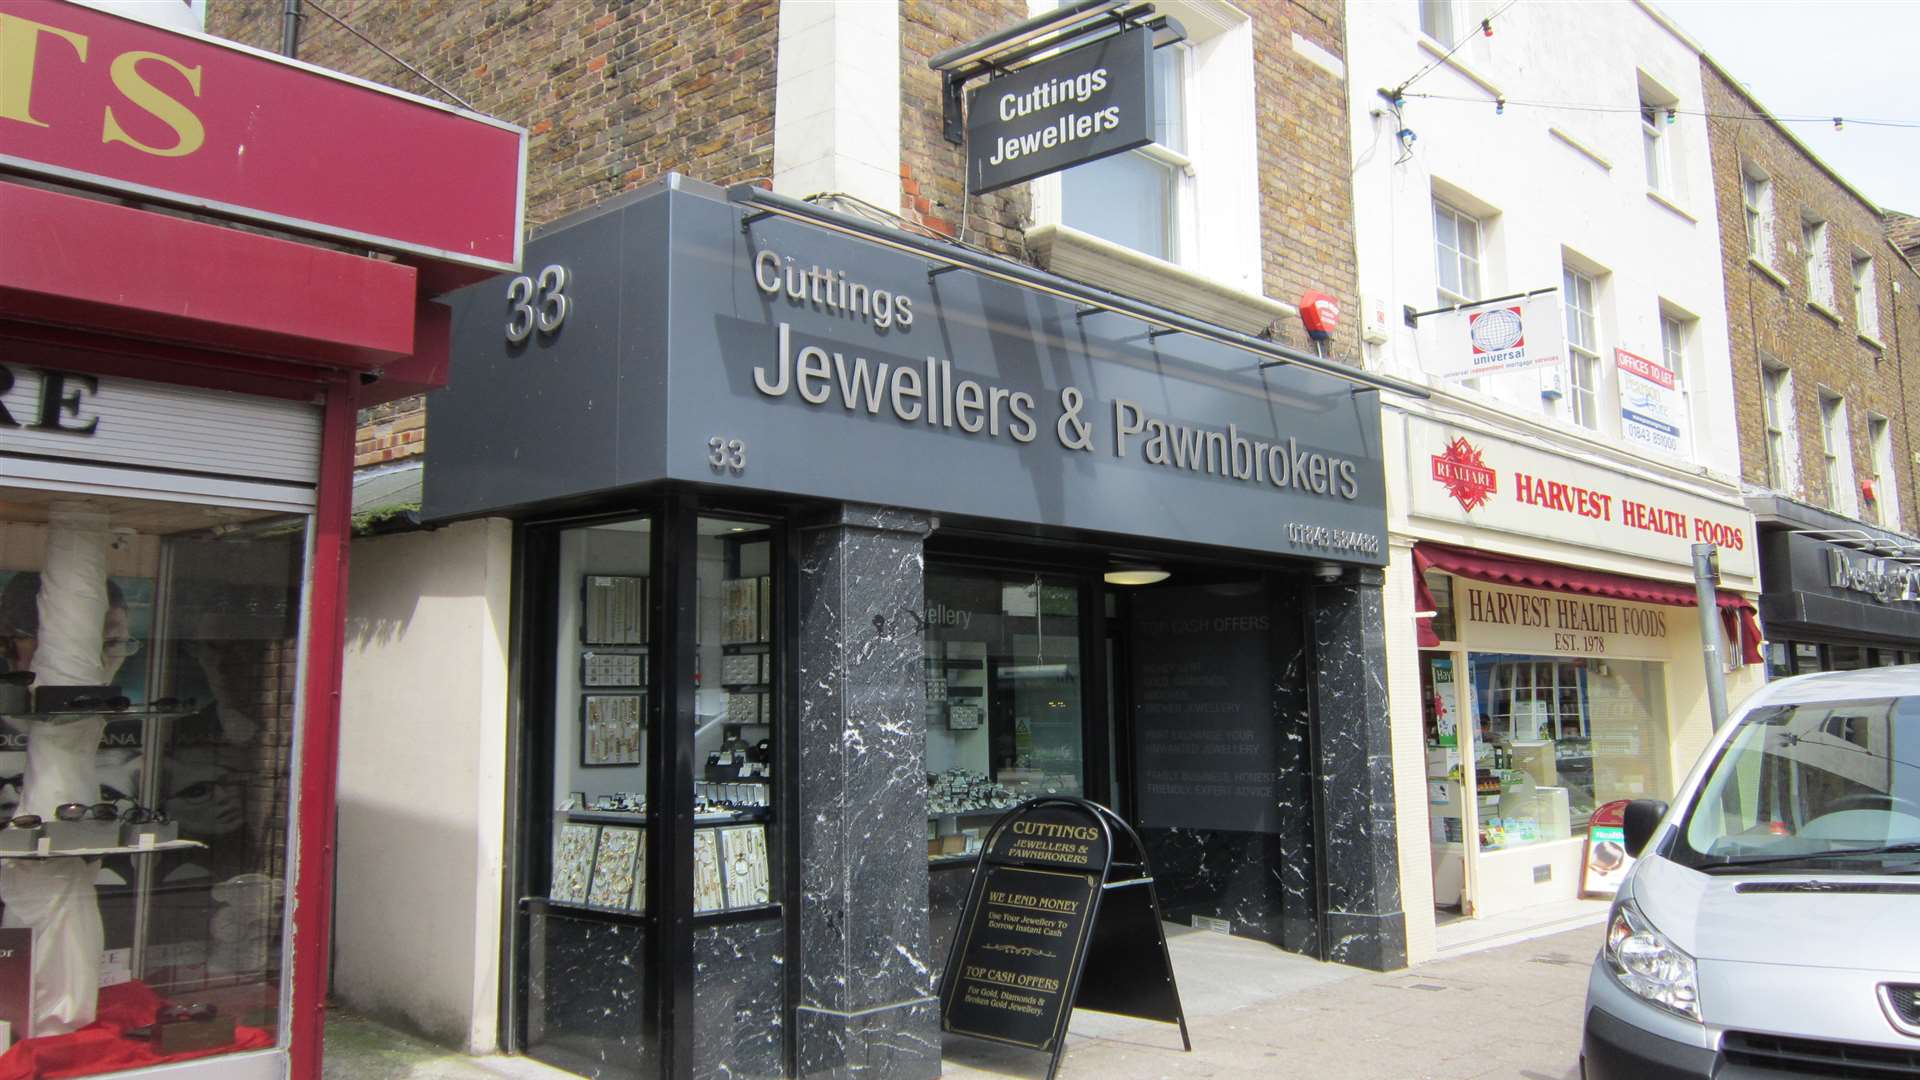 Cuttings jeweller's and pawnbroker's shop